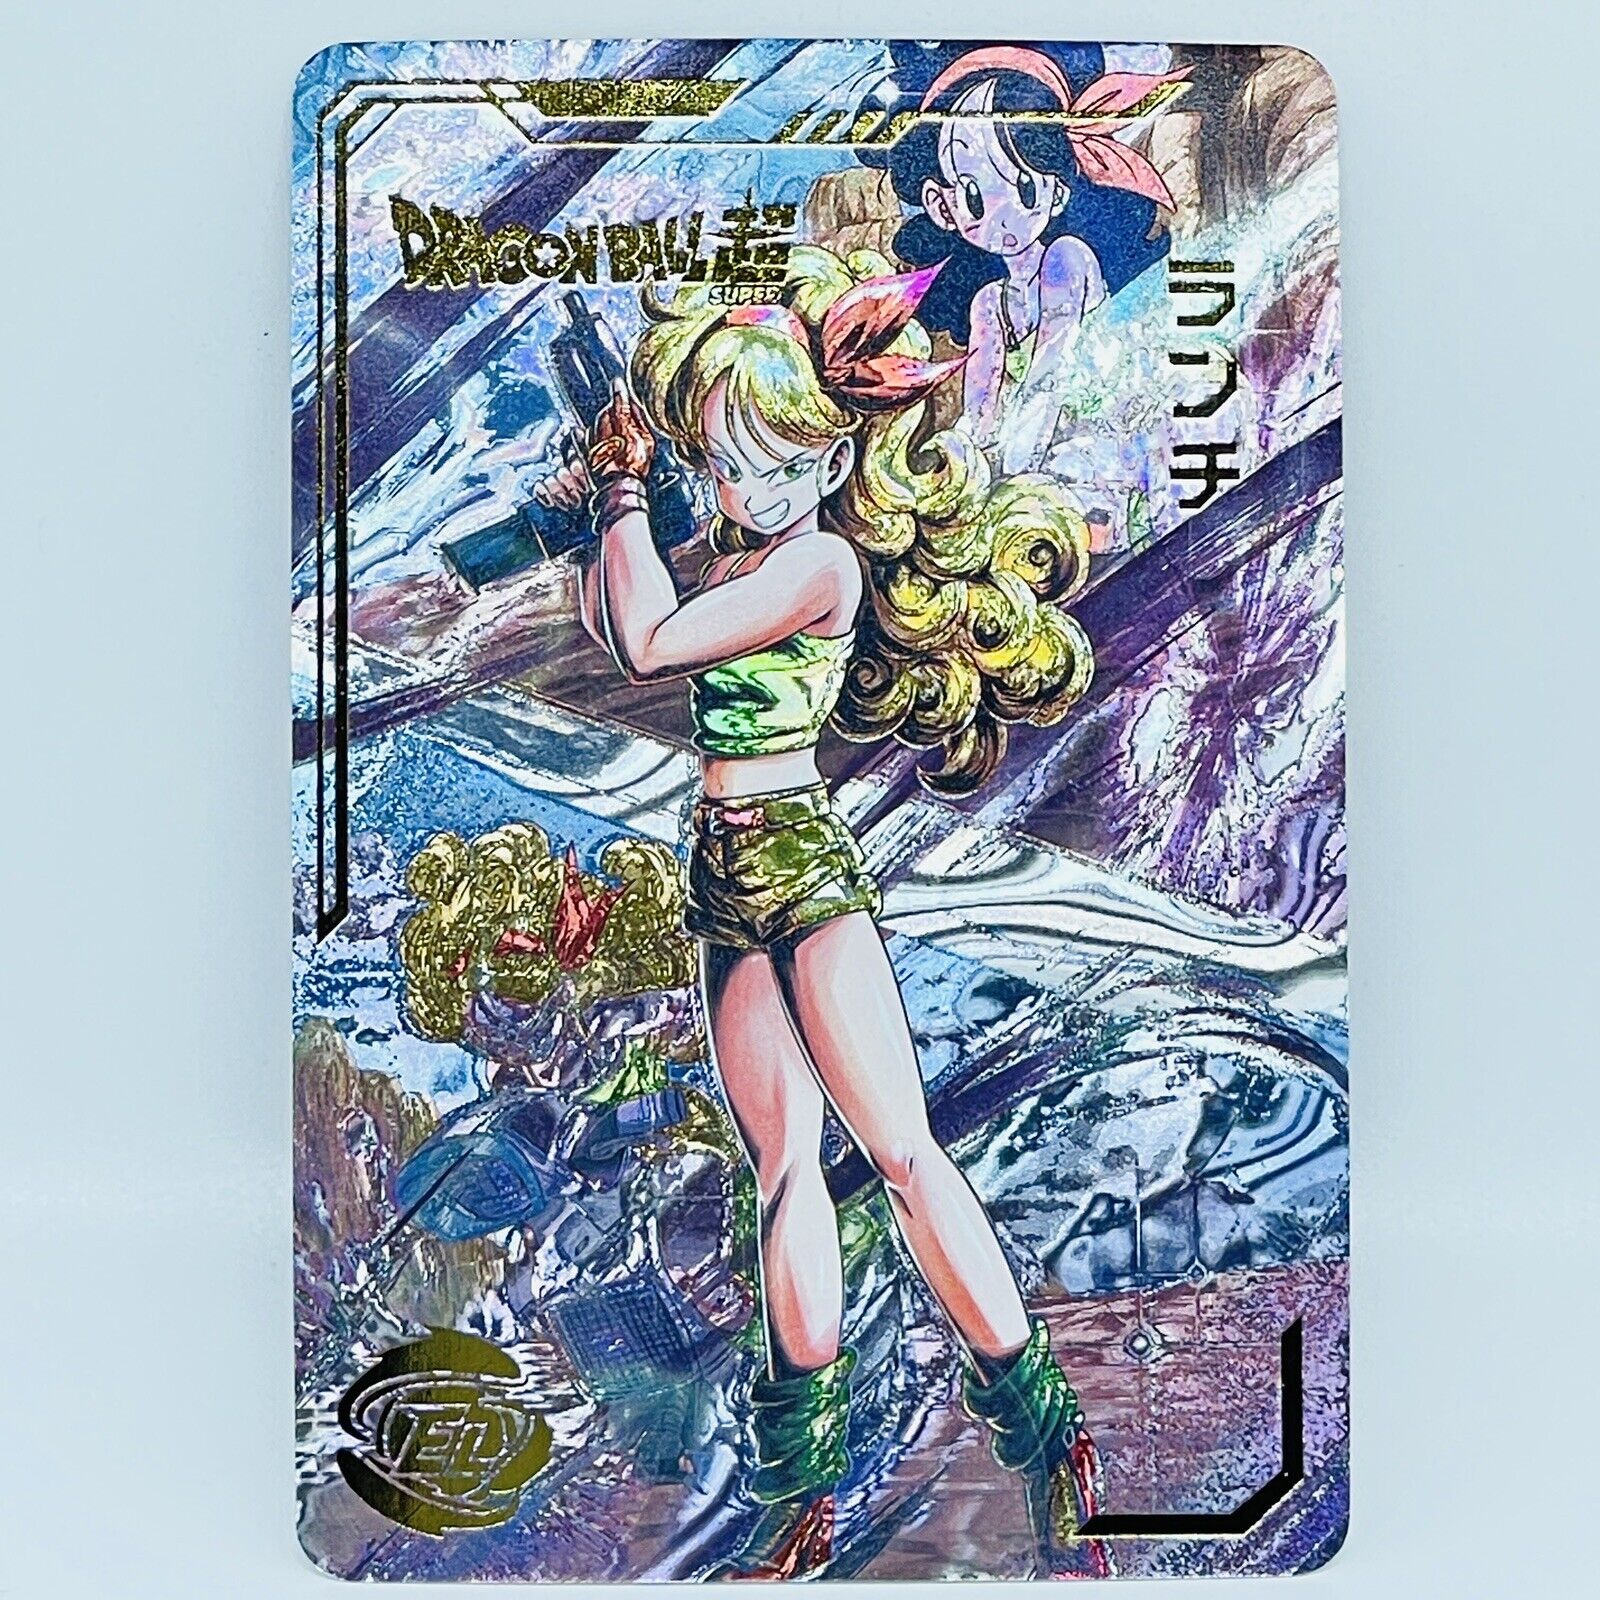 Dragonball Heroes Premium Foil Holographic Character Art Card - Launch